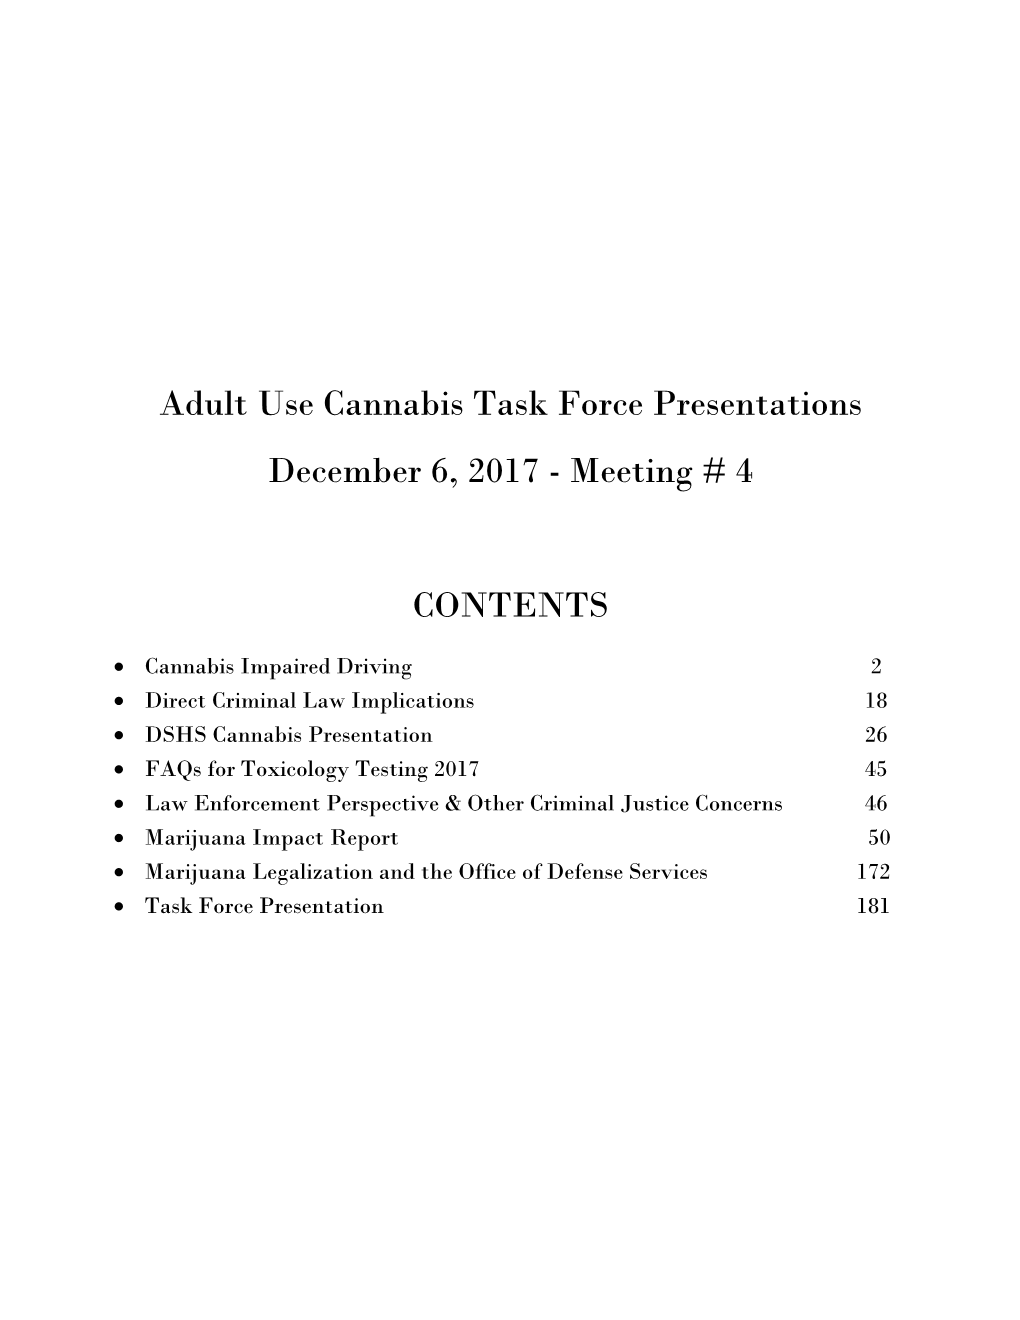 Adult Use Cannabis Task Force Presentations December 6, 2017 - Meeting # 4